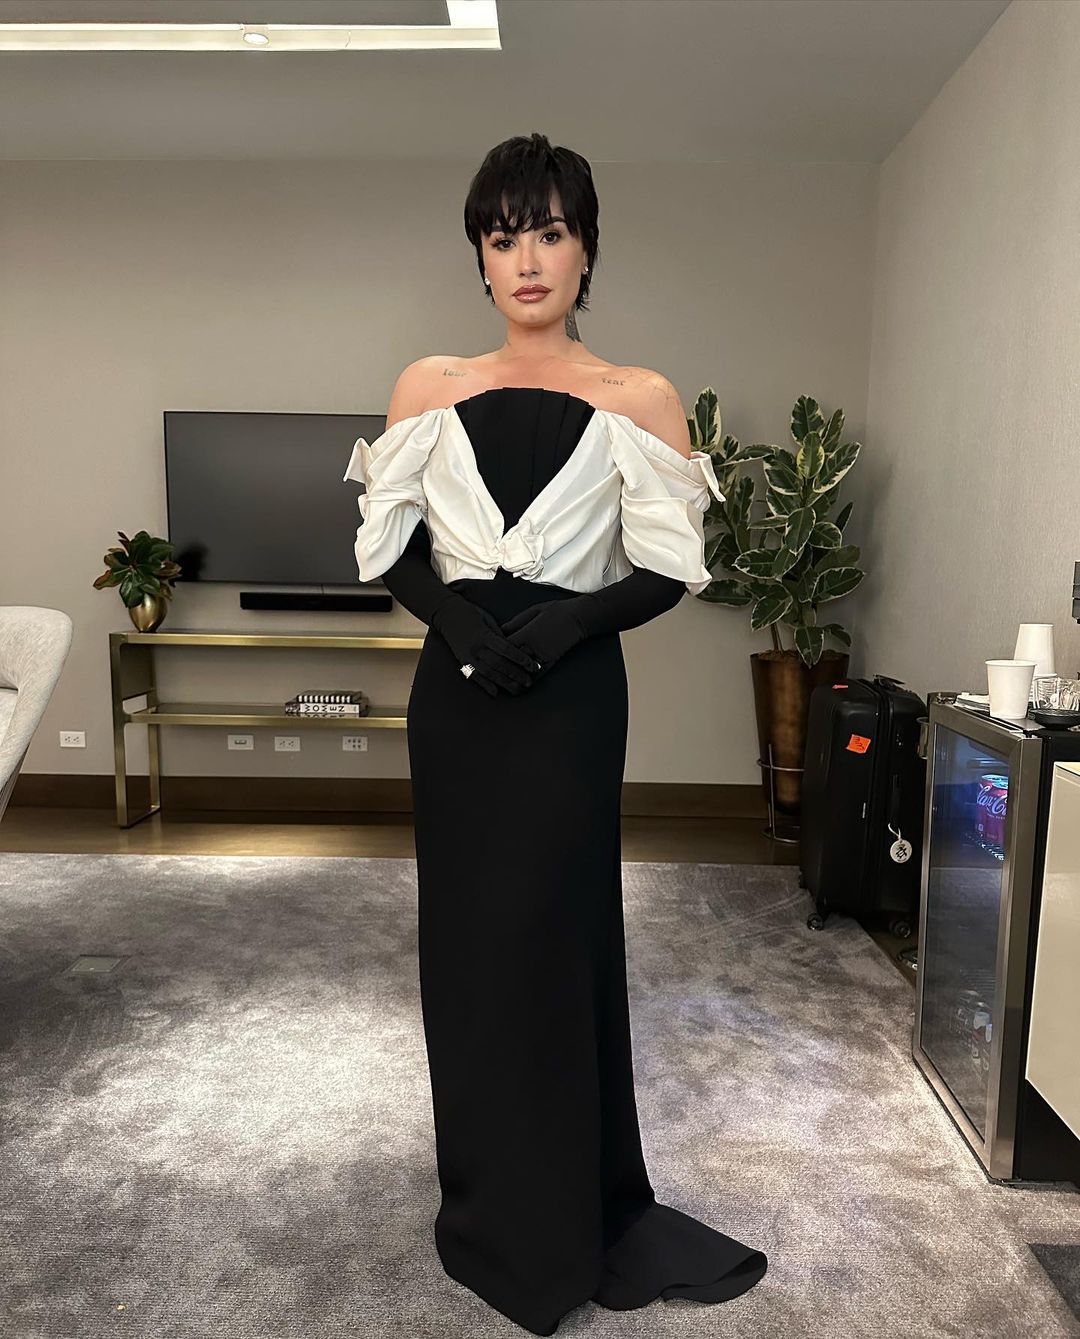 Demi Lovato seen in Off Shoulder Beautiful Dress at UNICEF USA Events, Nov 2022